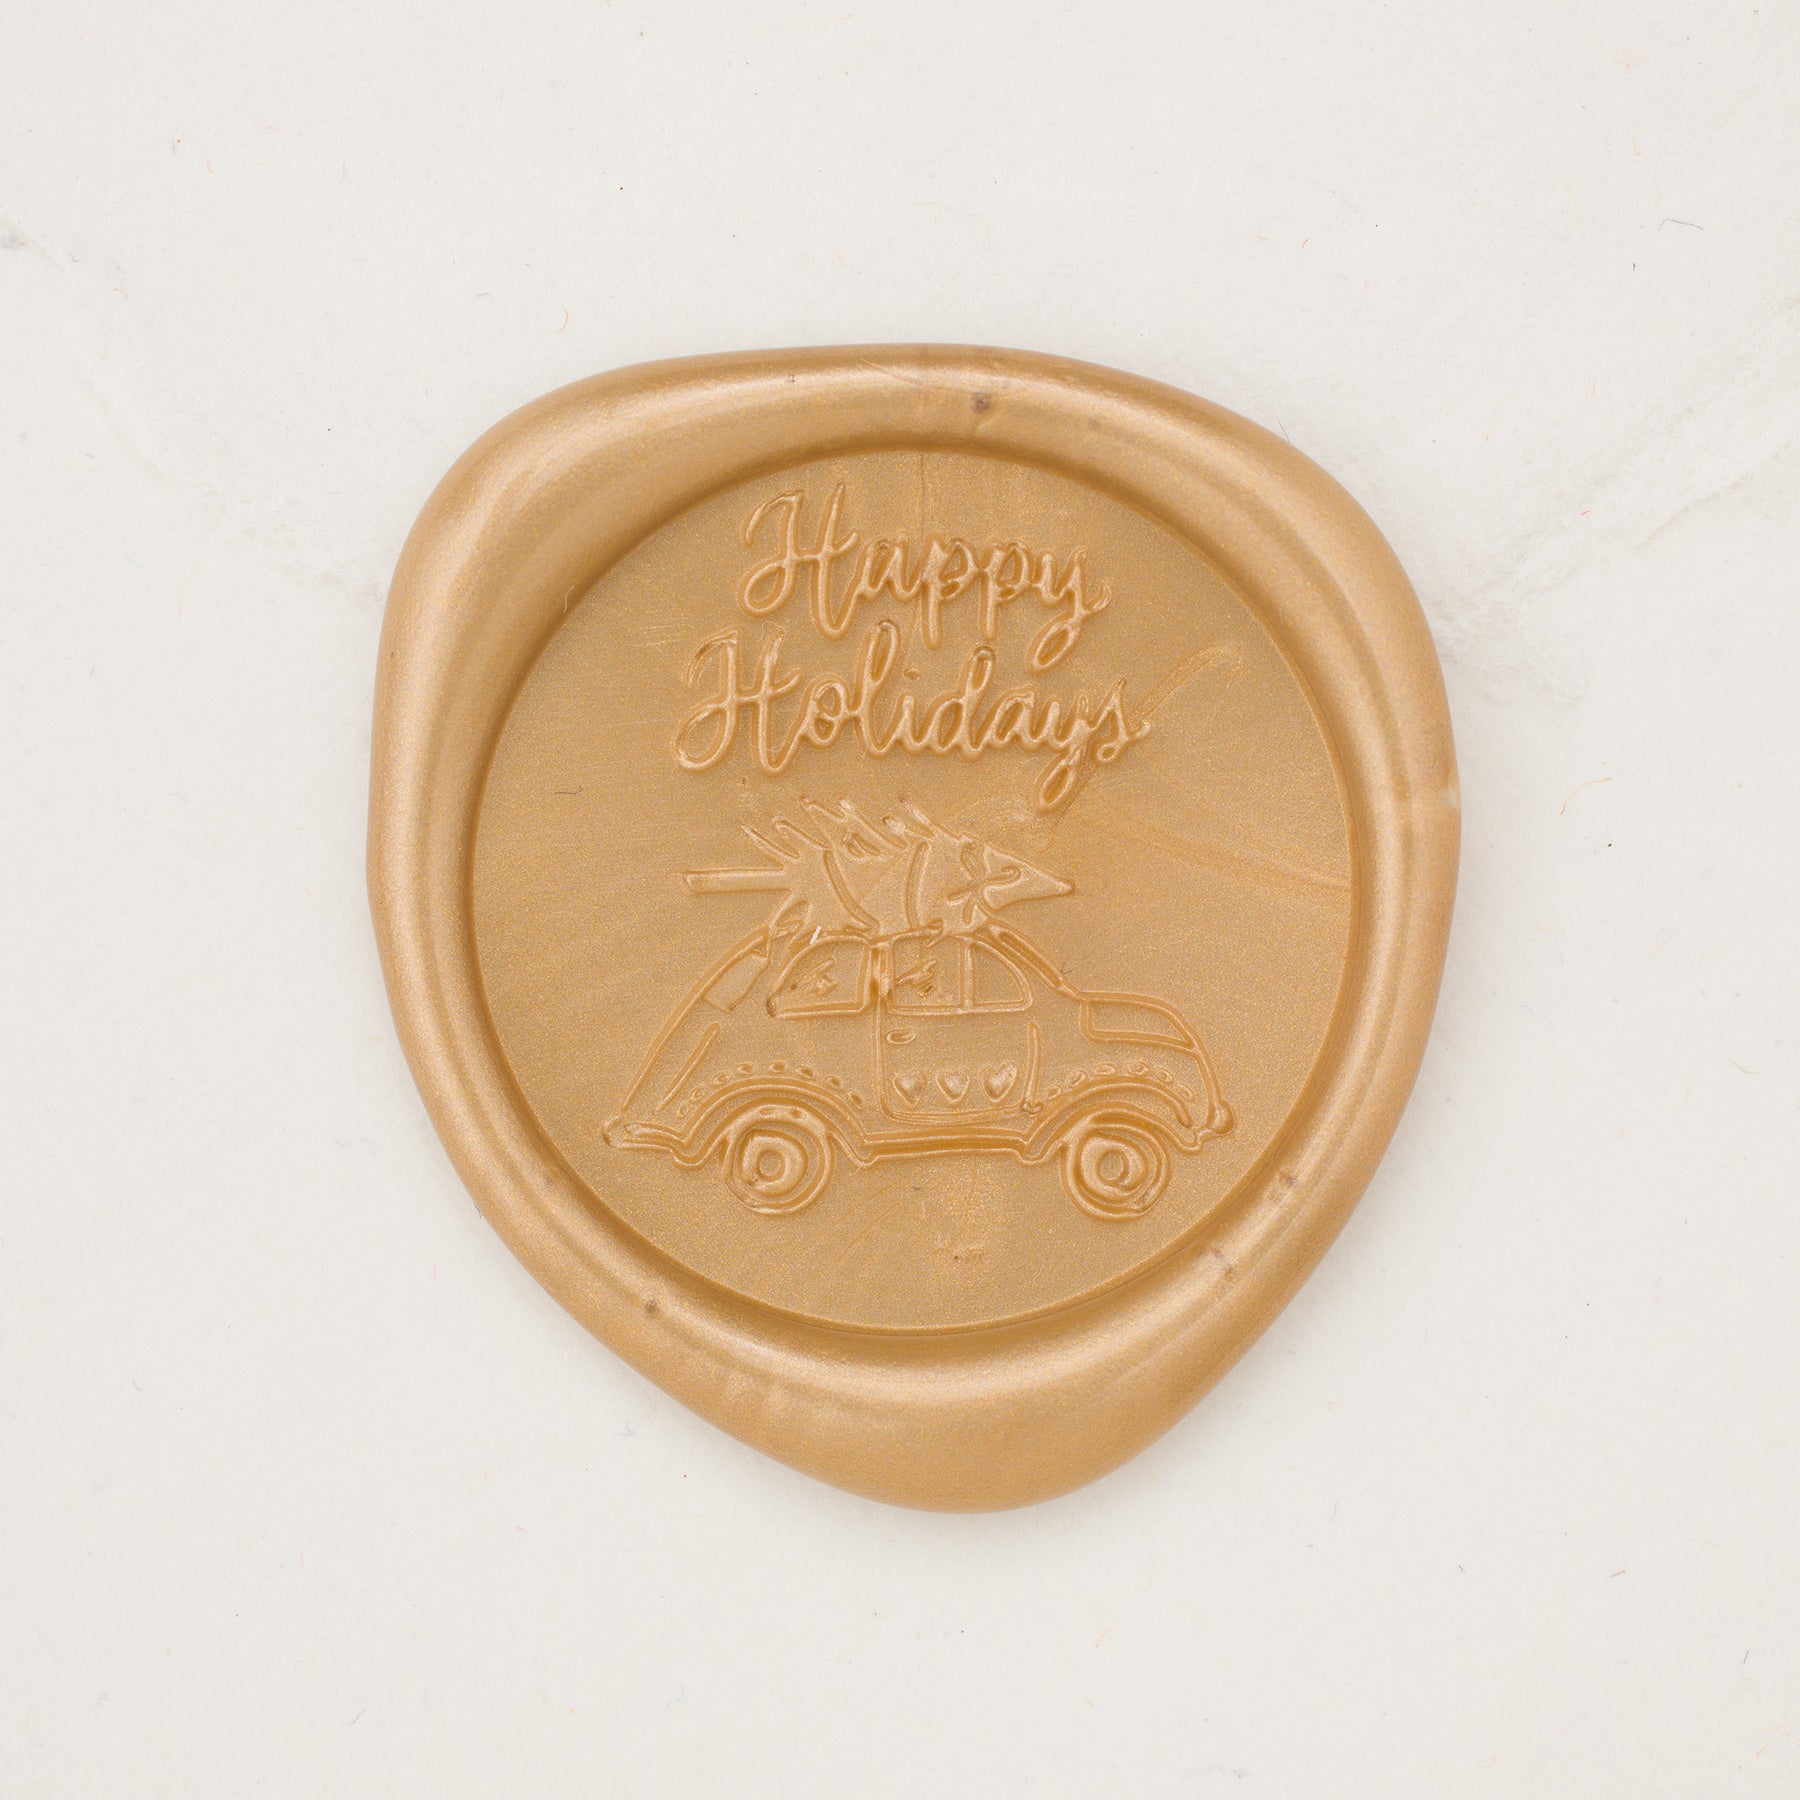 Happy Holidays in Gold (pack of 25) Wax Seals, Pack of 25 by